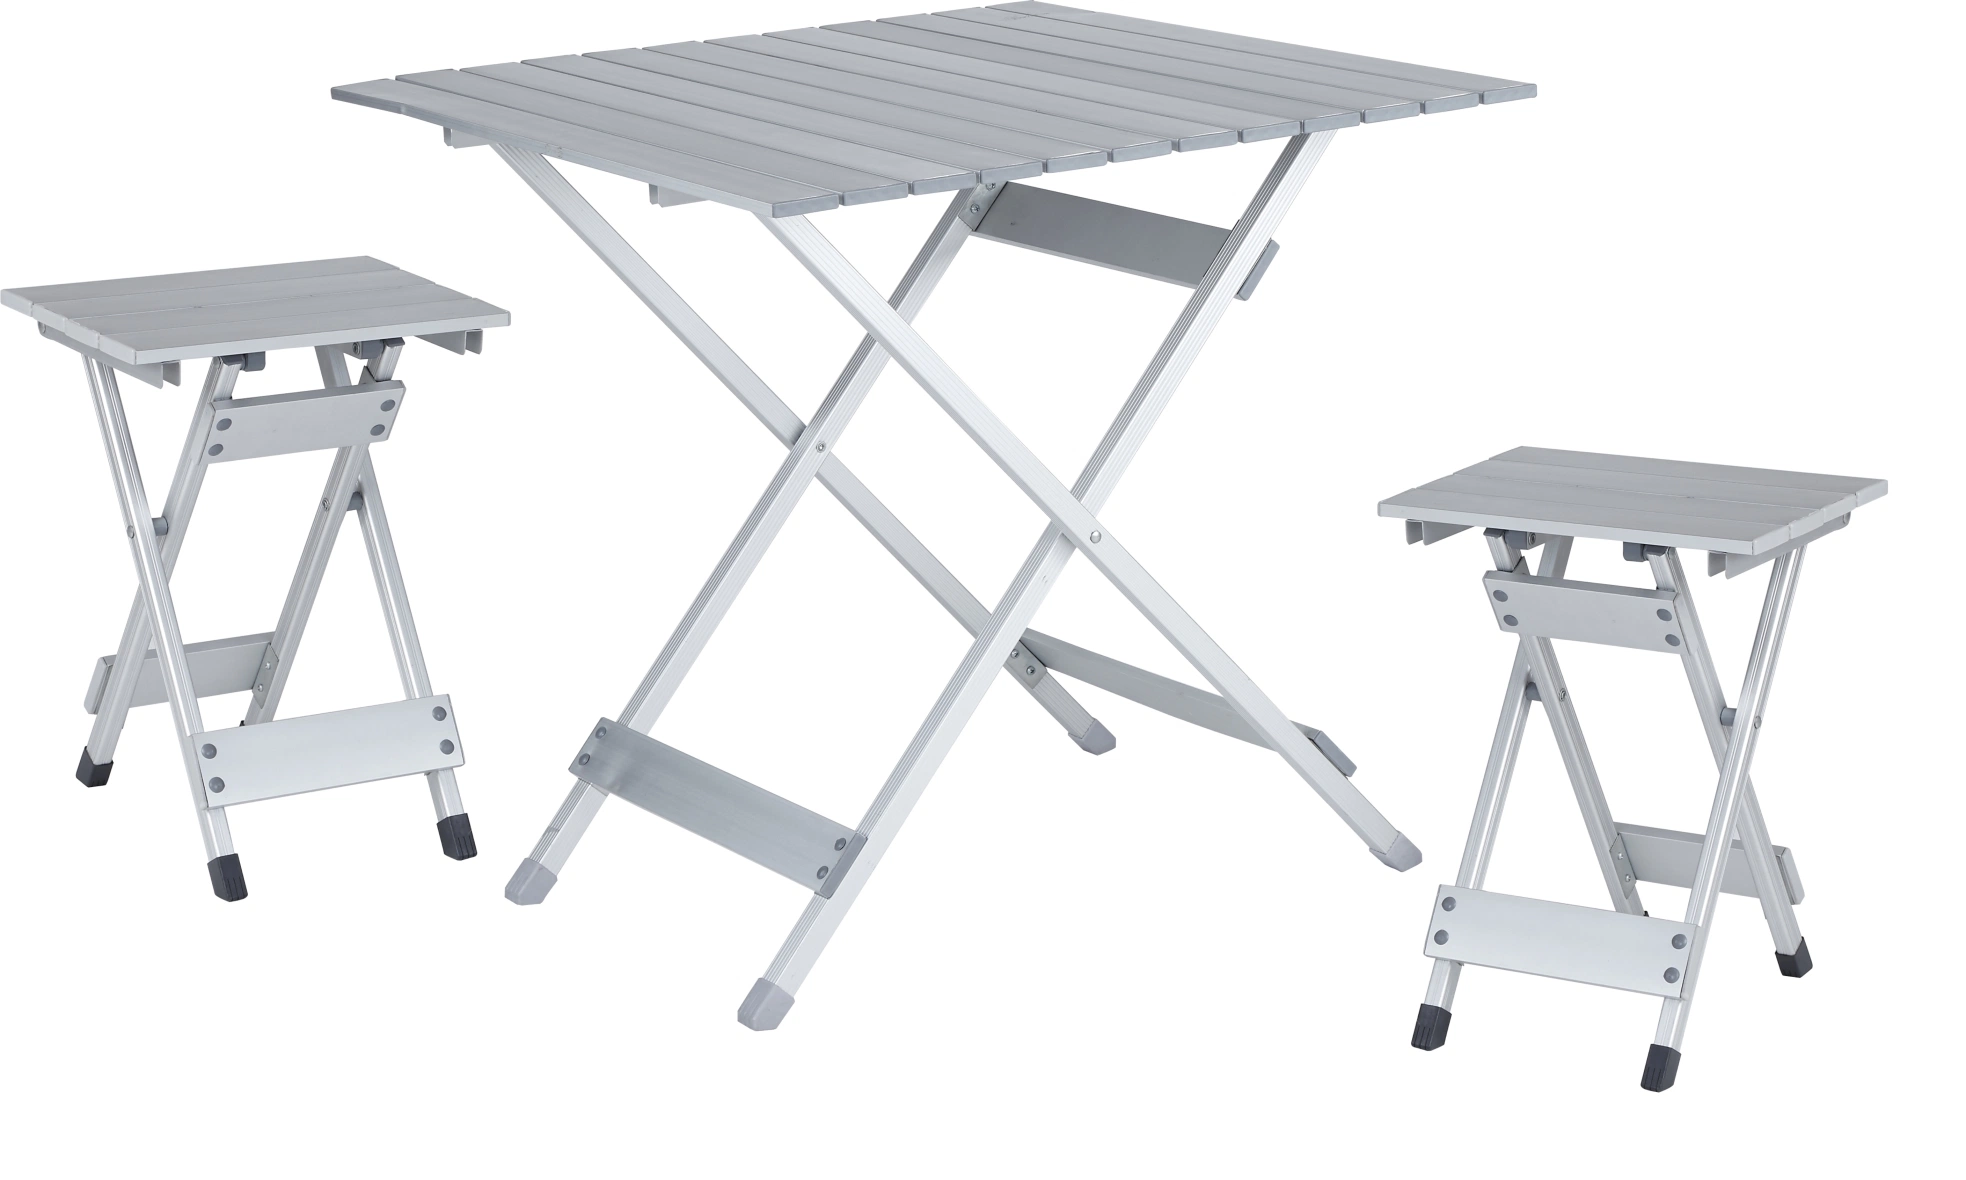 2021 High Quality Aluminum Desk Top Steel Frame Metal Portable Camping Picnic Beach Folding Table for Outdoor